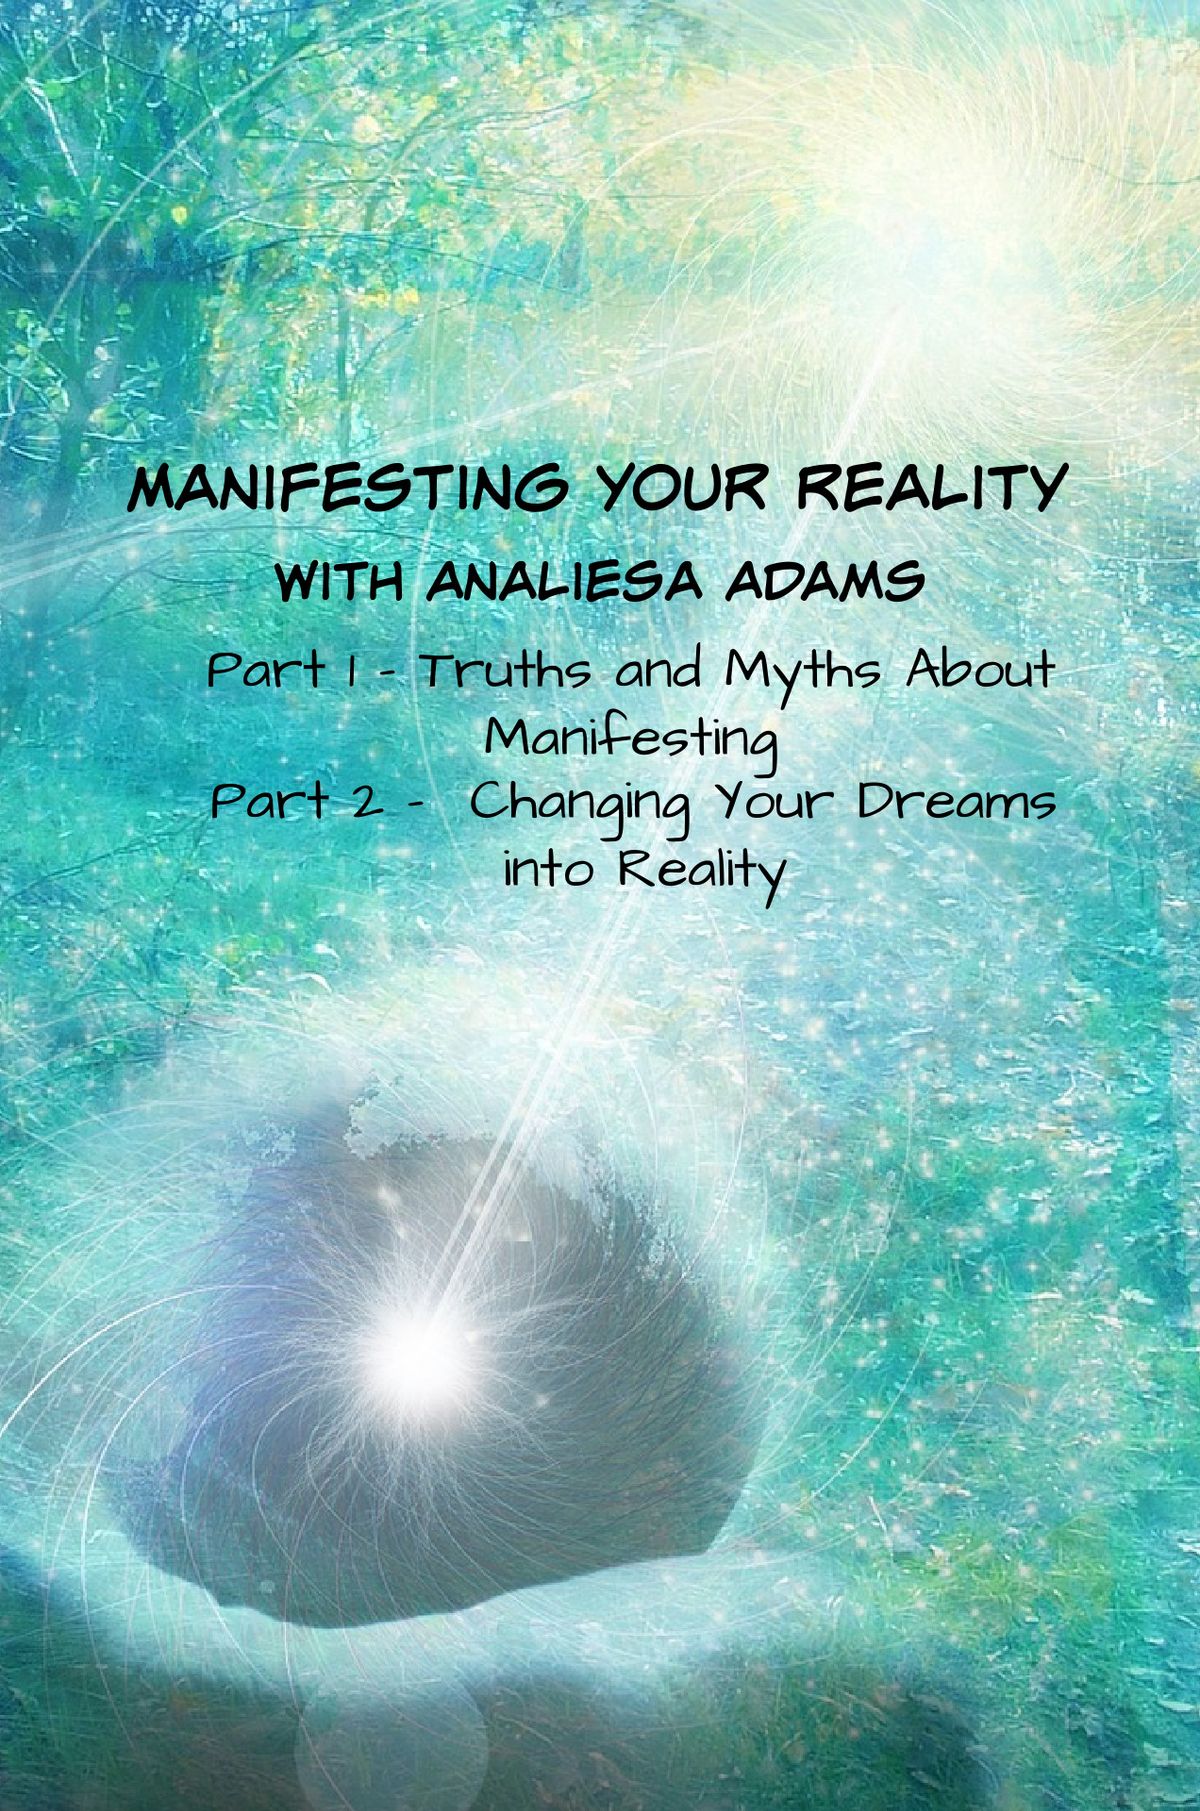 Manifesting Your Reality - Part 2: Changing Your Dreams into Reality